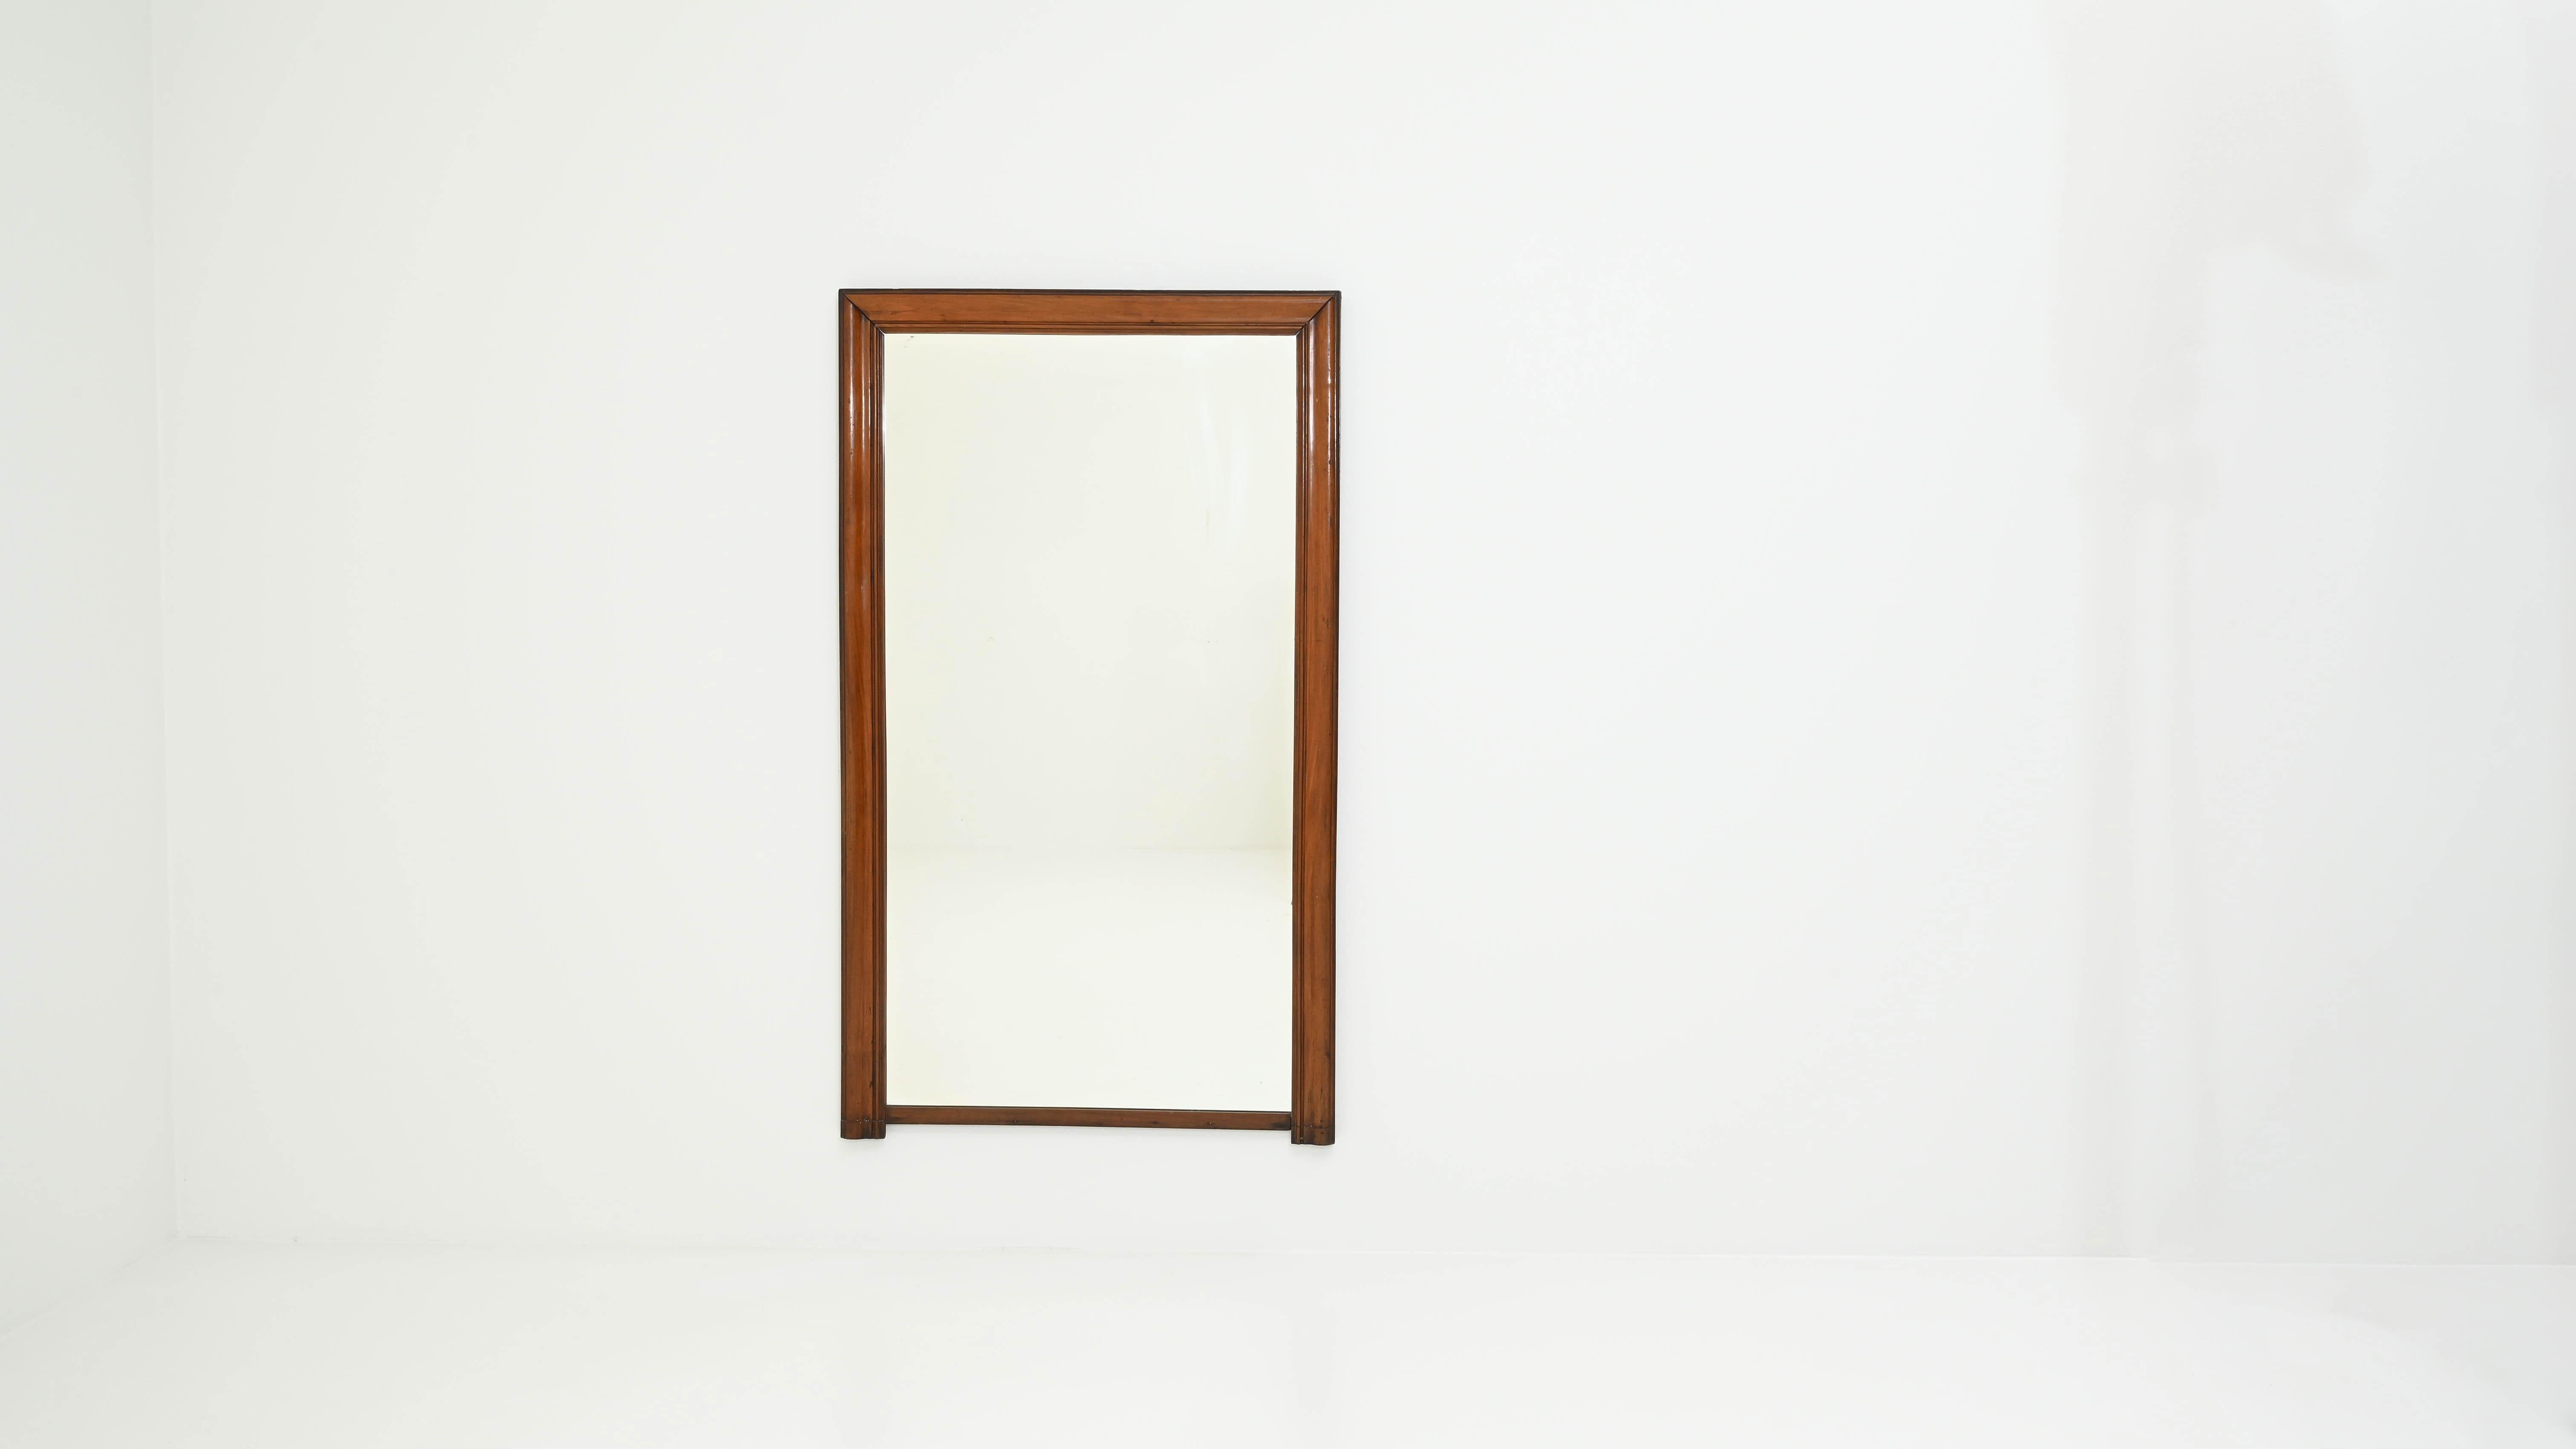 The understated silhouette of this 19th-century mirror, made in France, is shaped by the elegant rectangular frame with protruding bottom corners and a thinner line along the lower edge. The warm amber hue of the polished wood brings a touch of